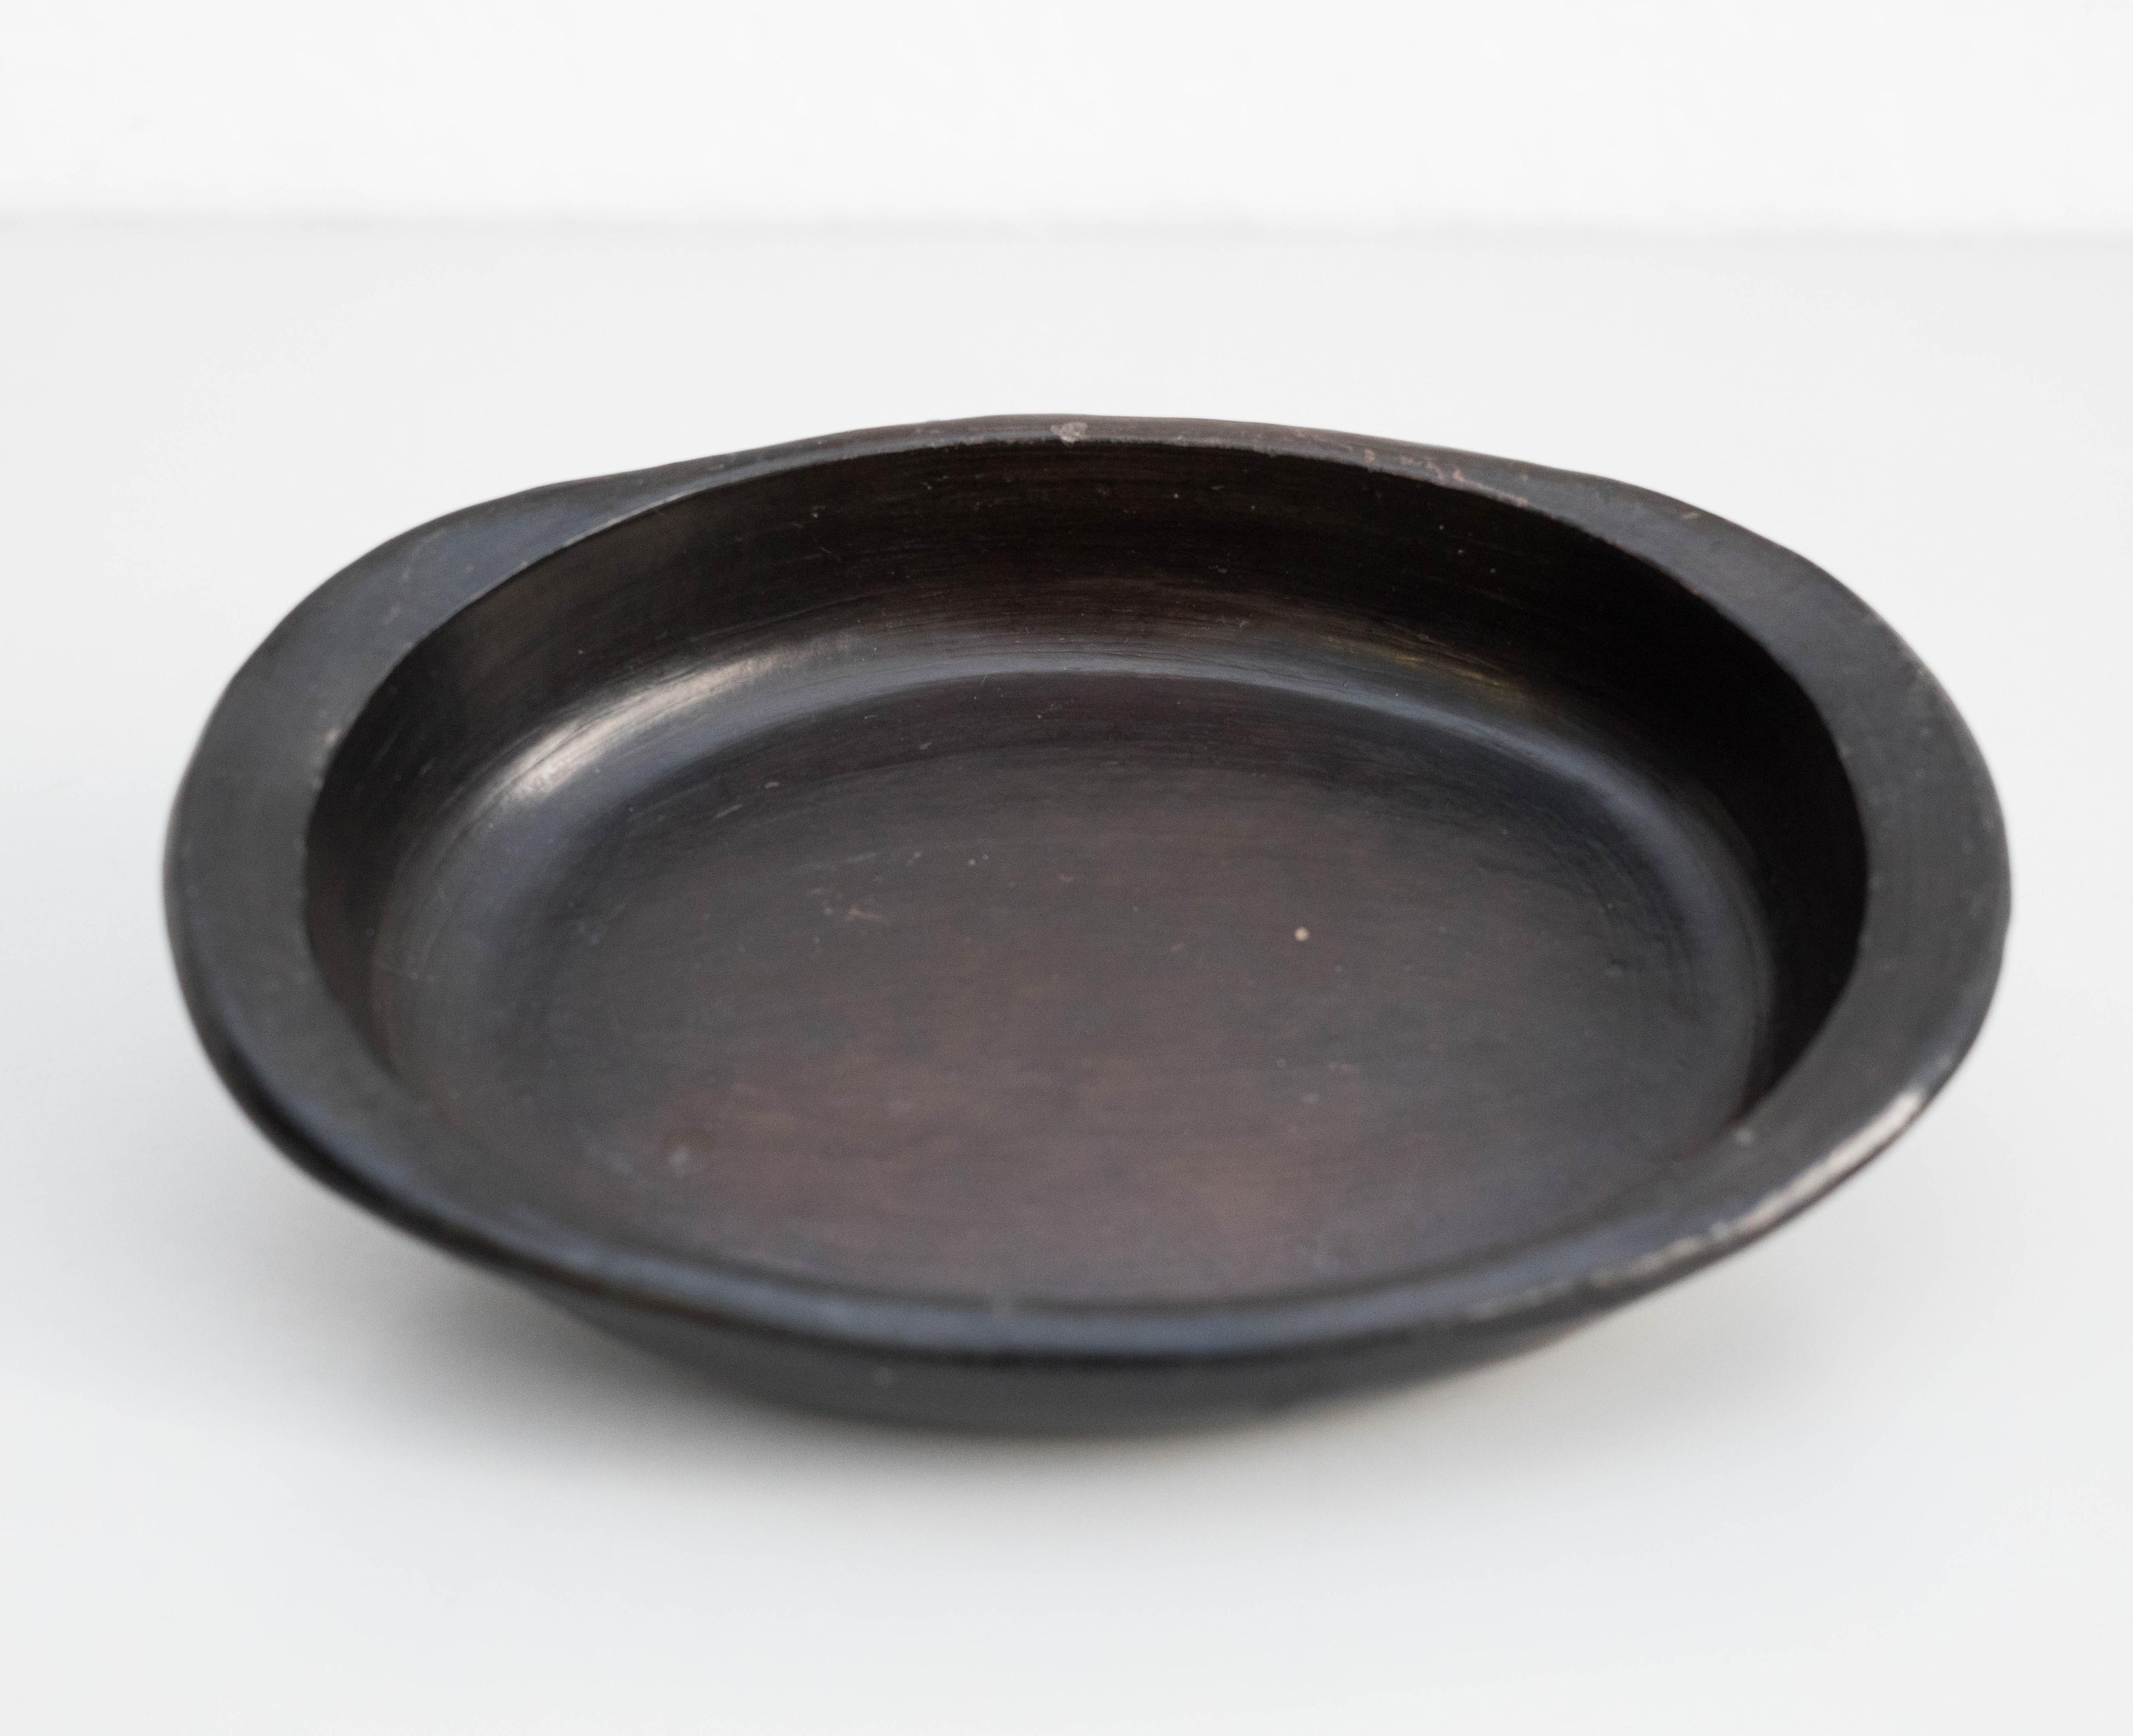 Decorative earthenware tray, by an unknown designer.
Manufactured in Spain, circa 1950.

In good original condition, with minor wear consistent with age and use, preserving a beautiful patina.

Materials:
Earthenware.